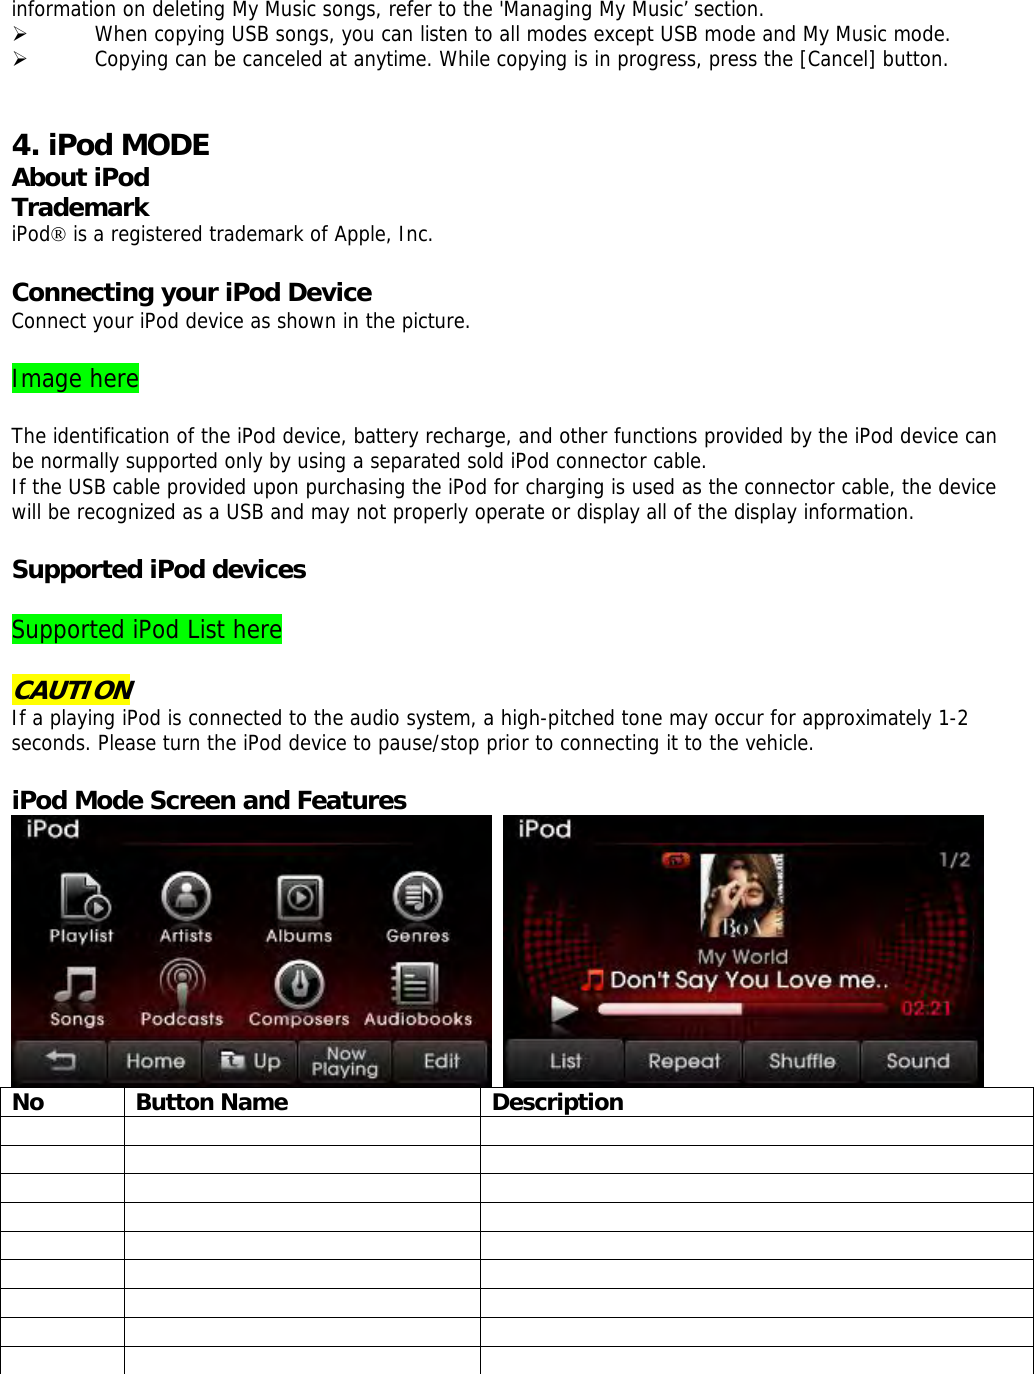 information on deleting My Music songs, refer to the &apos;Managing My Music’ section. ¾ When copying USB songs, you can listen to all modes except USB mode and My Music mode.  ¾ Copying can be canceled at anytime. While copying is in progress, press the [Cancel] button.    4. iPod MODE About iPod Trademark iPod® is a registered trademark of Apple, Inc.  Connecting your iPod Device Connect your iPod device as shown in the picture.  Image here  The identification of the iPod device, battery recharge, and other functions provided by the iPod device can be normally supported only by using a separated sold iPod connector cable. If the USB cable provided upon purchasing the iPod for charging is used as the connector cable, the device will be recognized as a USB and may not properly operate or display all of the display information.  Supported iPod devices  Supported iPod List here   CAUTION If a playing iPod is connected to the audio system, a high-pitched tone may occur for approximately 1-2 seconds. Please turn the iPod device to pause/stop prior to connecting it to the vehicle.  iPod Mode Screen and Features    No Button Name  Description                                      